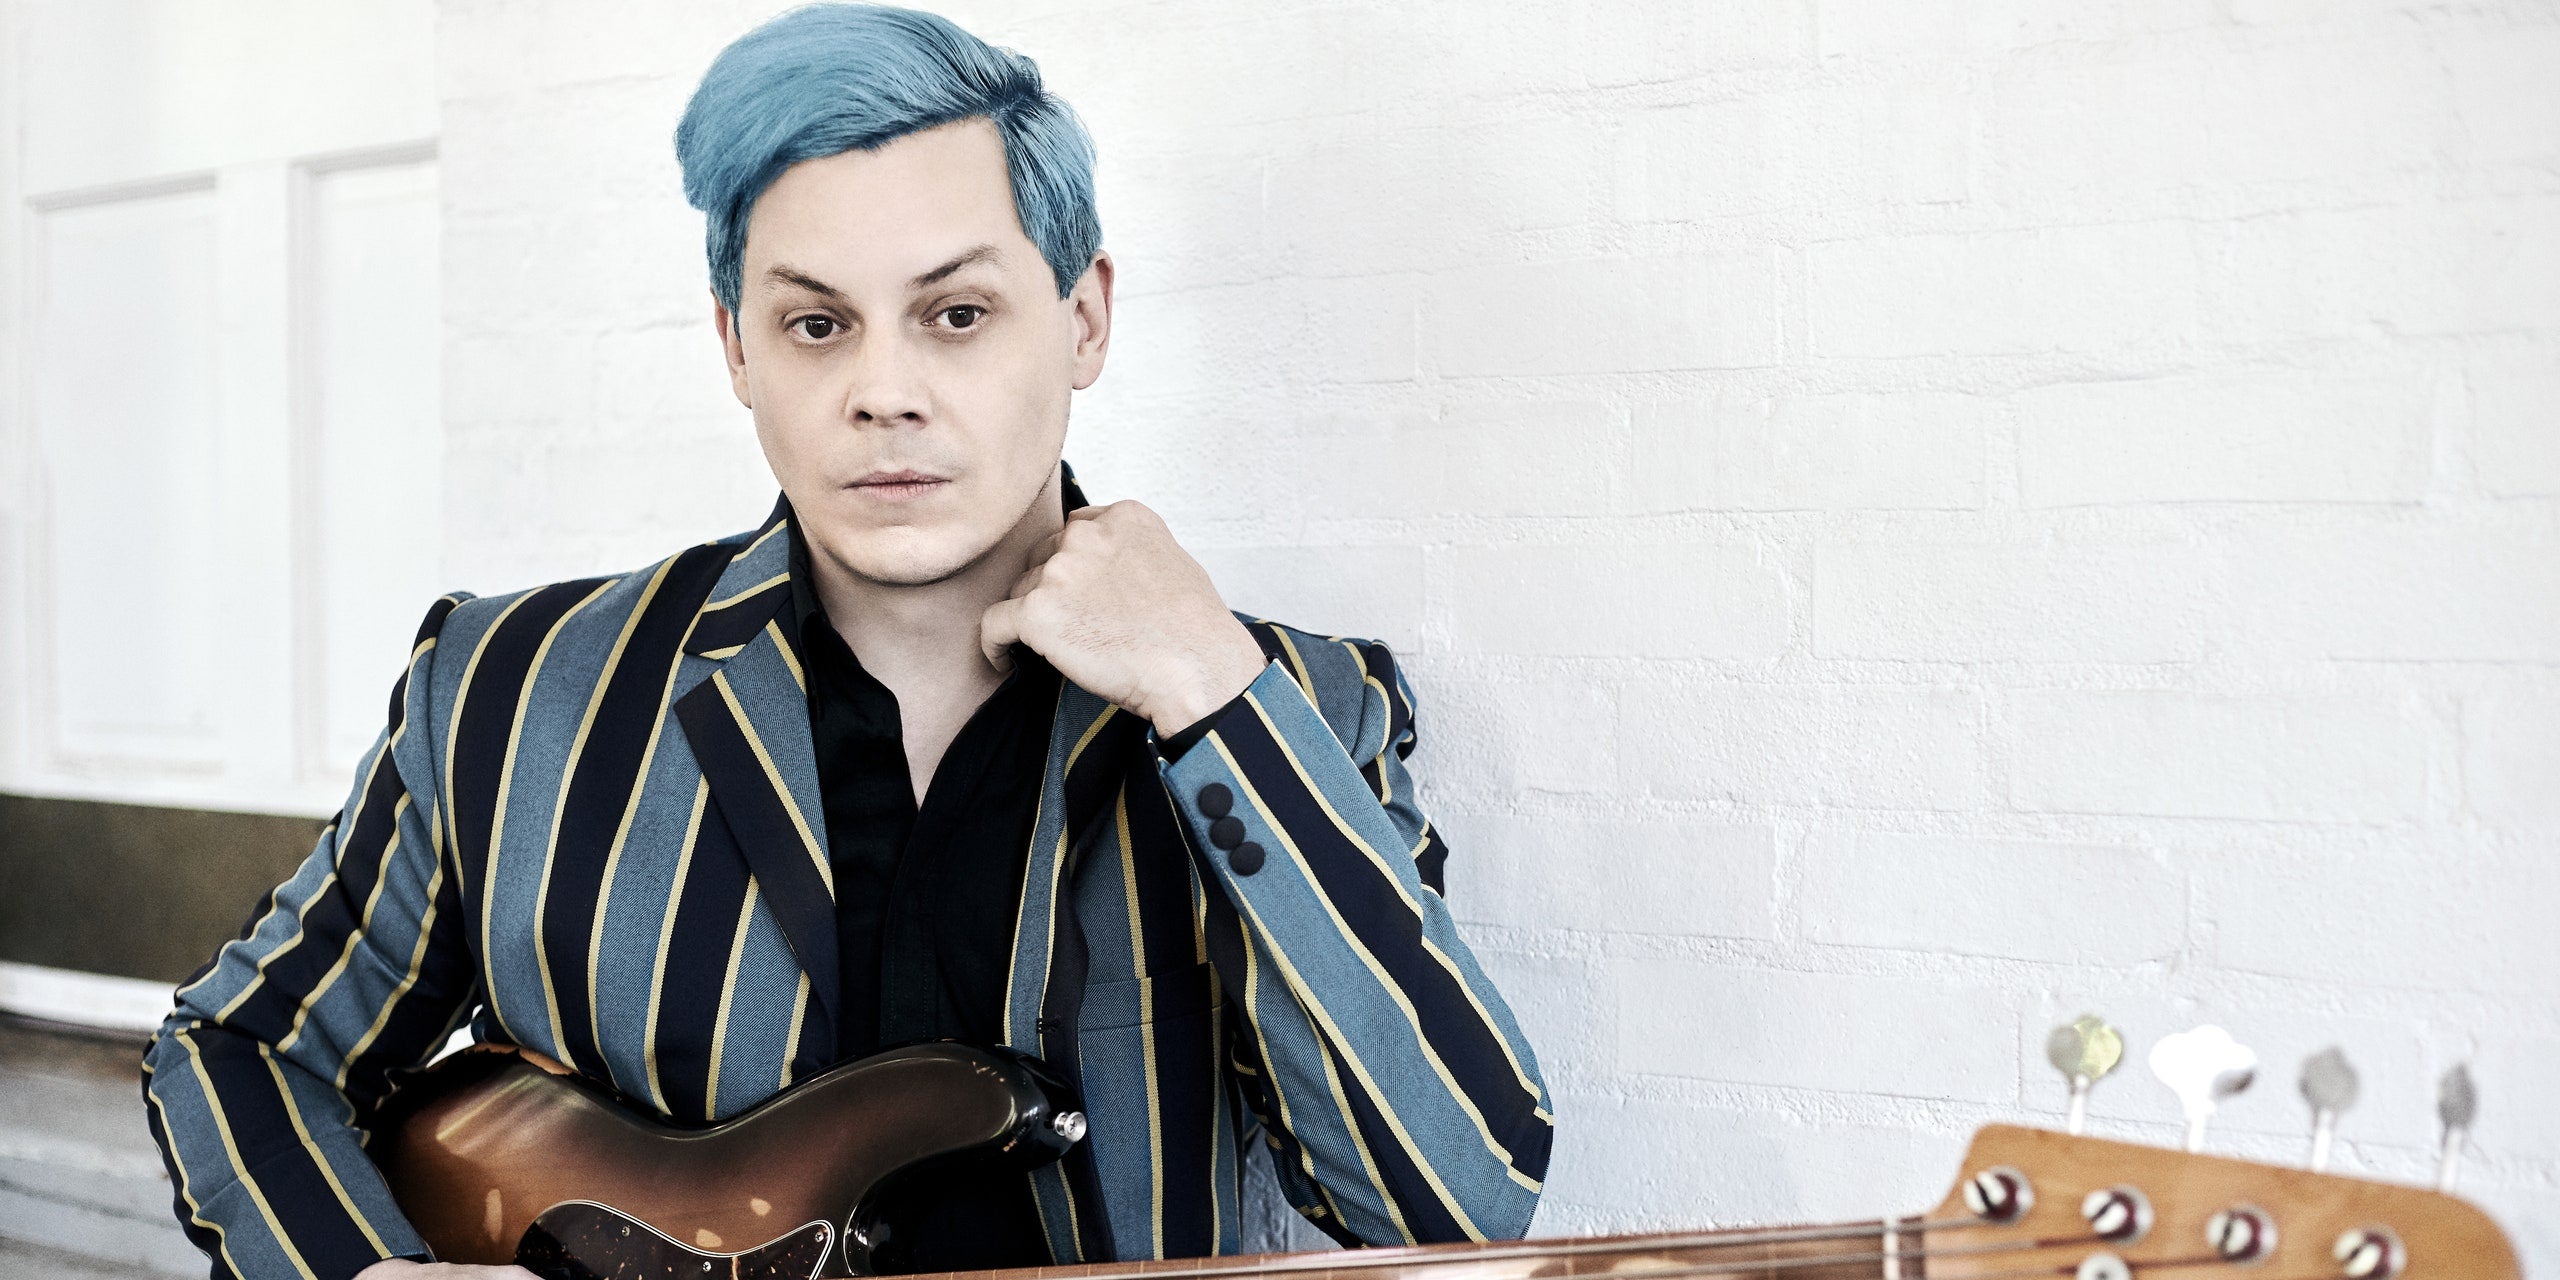 Watch Jack White Perform 'The Star Spangled Banner'